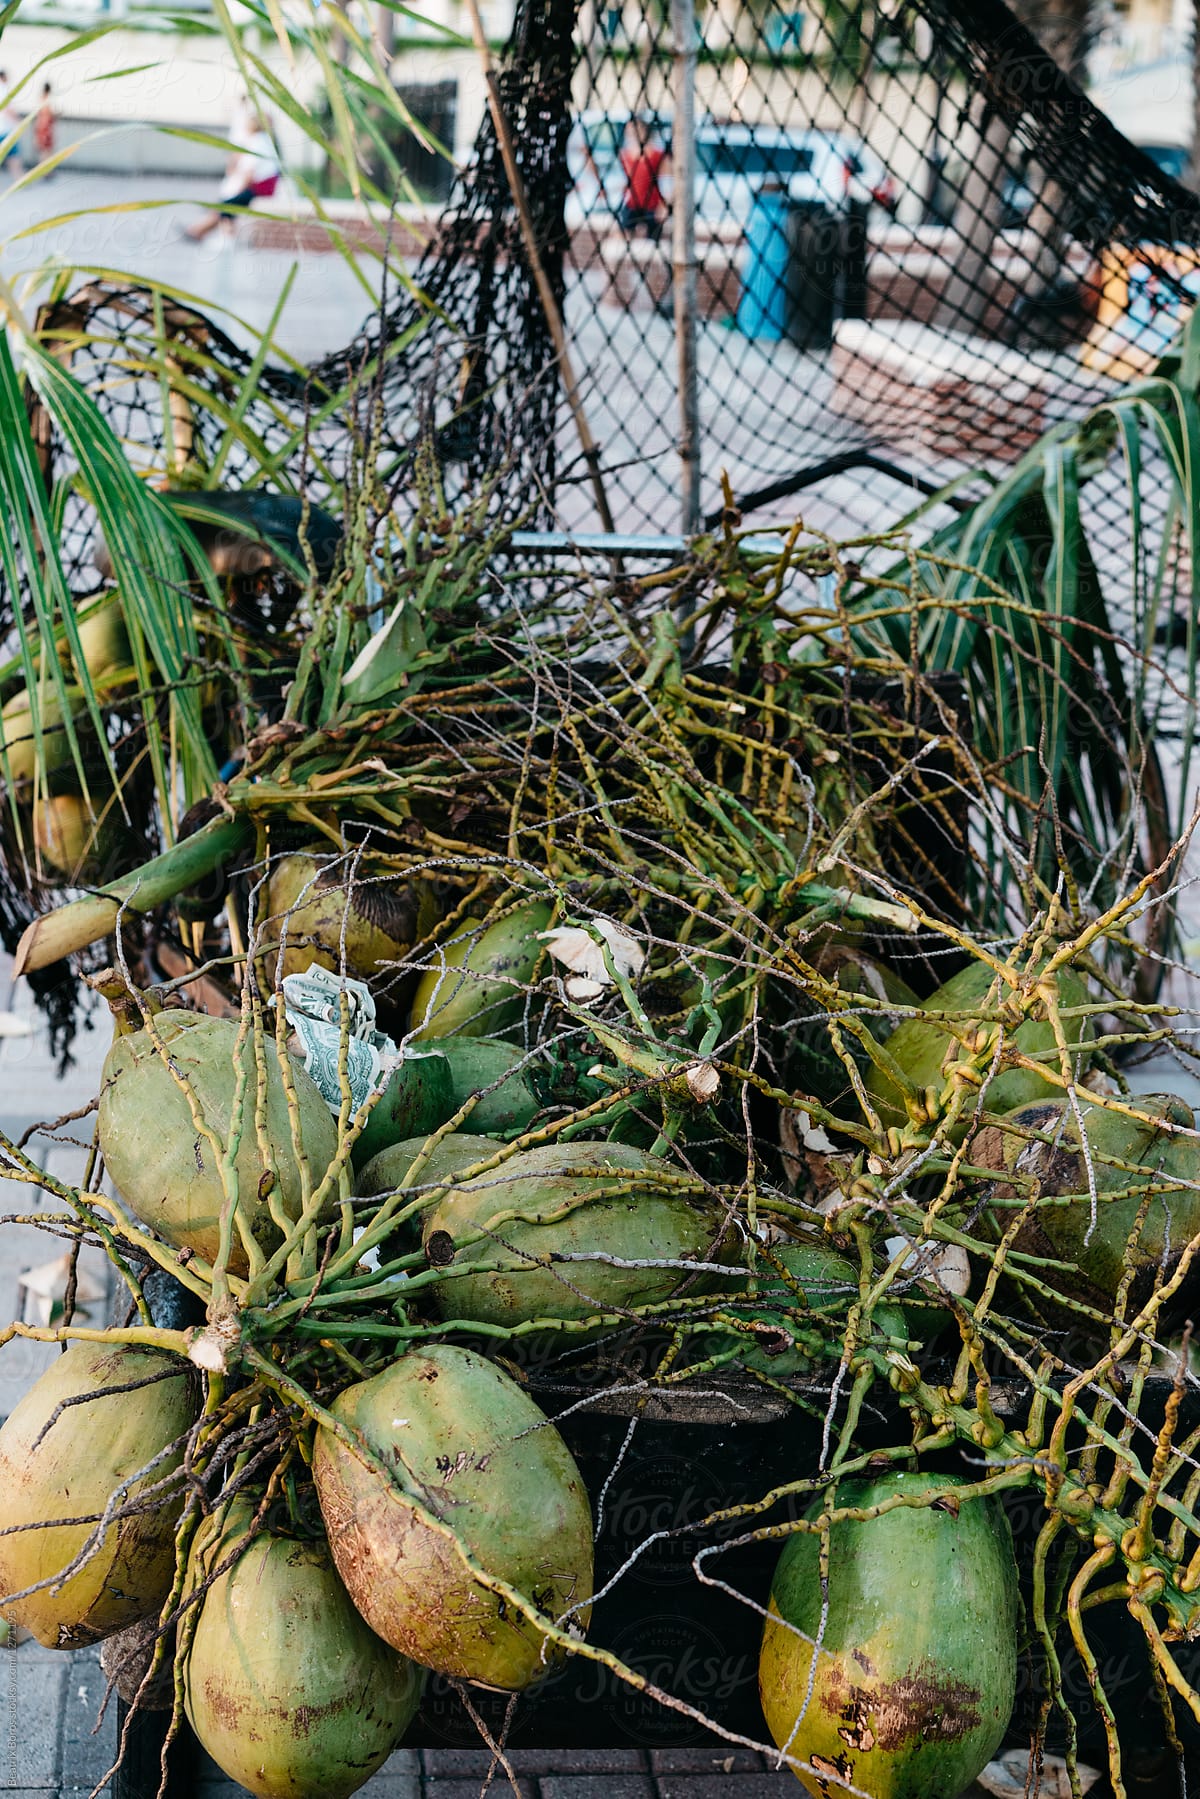 A street seller's fresh coconuts